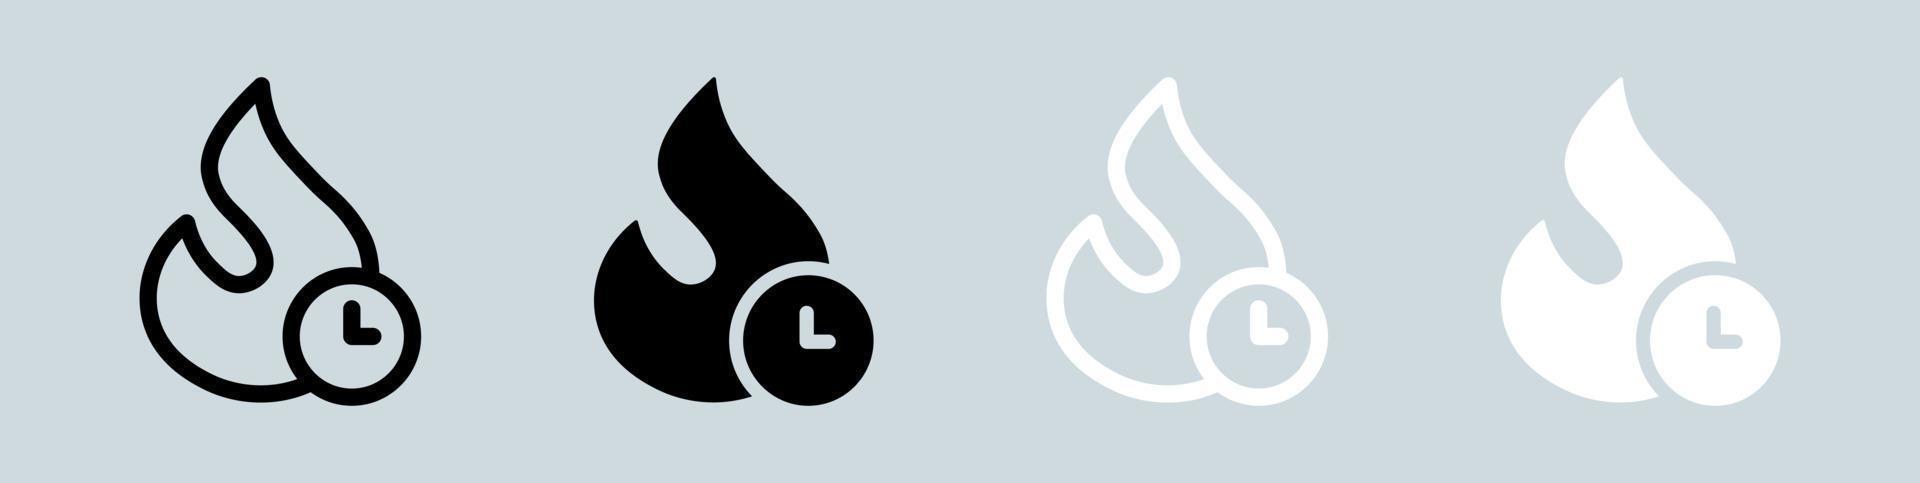 Trend icon set in black and white. Fire signs vector illustration.